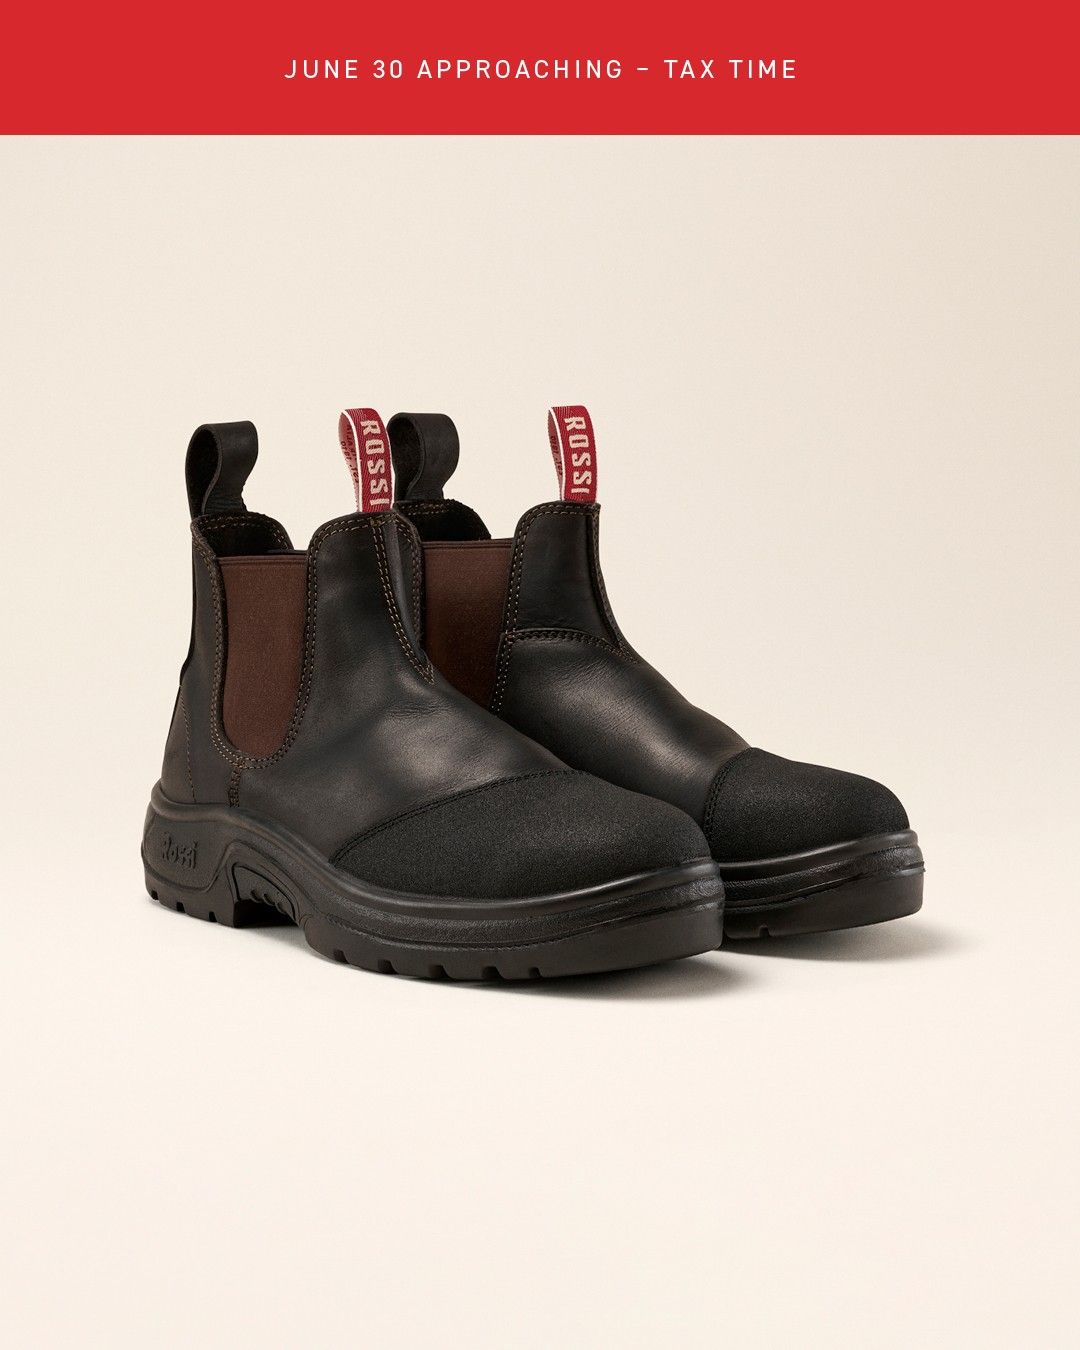 HERCULES SAFETY BOOT 

A hardy work boot with Surtek toe abrasi...

Shop all via link in bio.

#RossiBoots